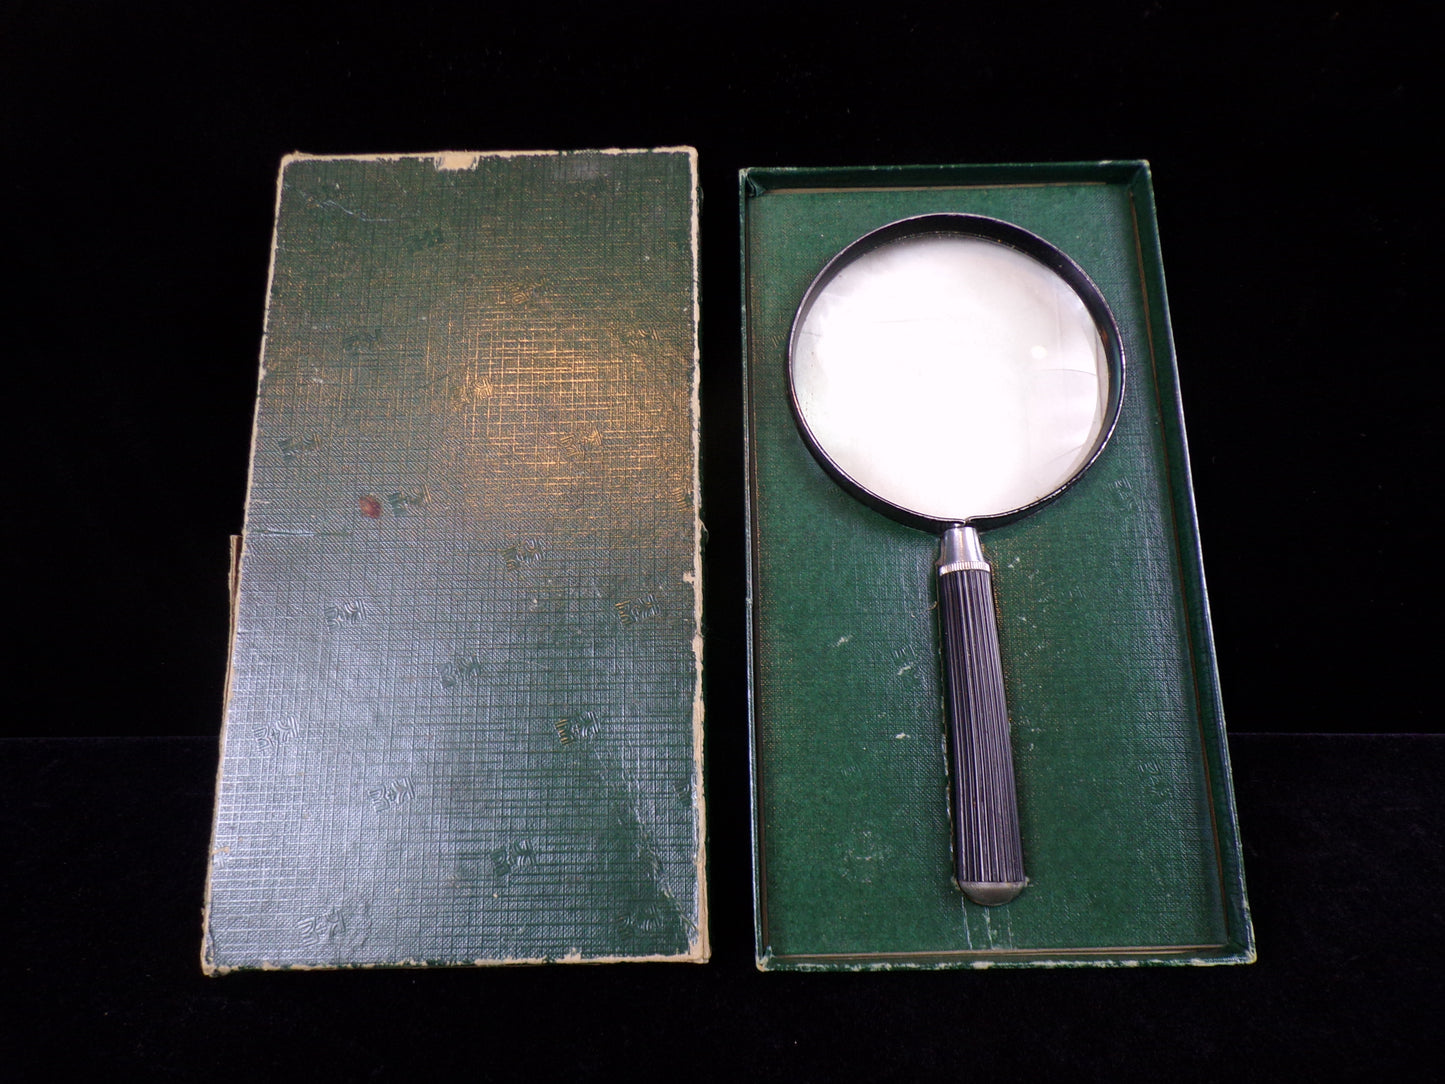 Vintage K&E Magnifying Glass, Reading Glass, with Box